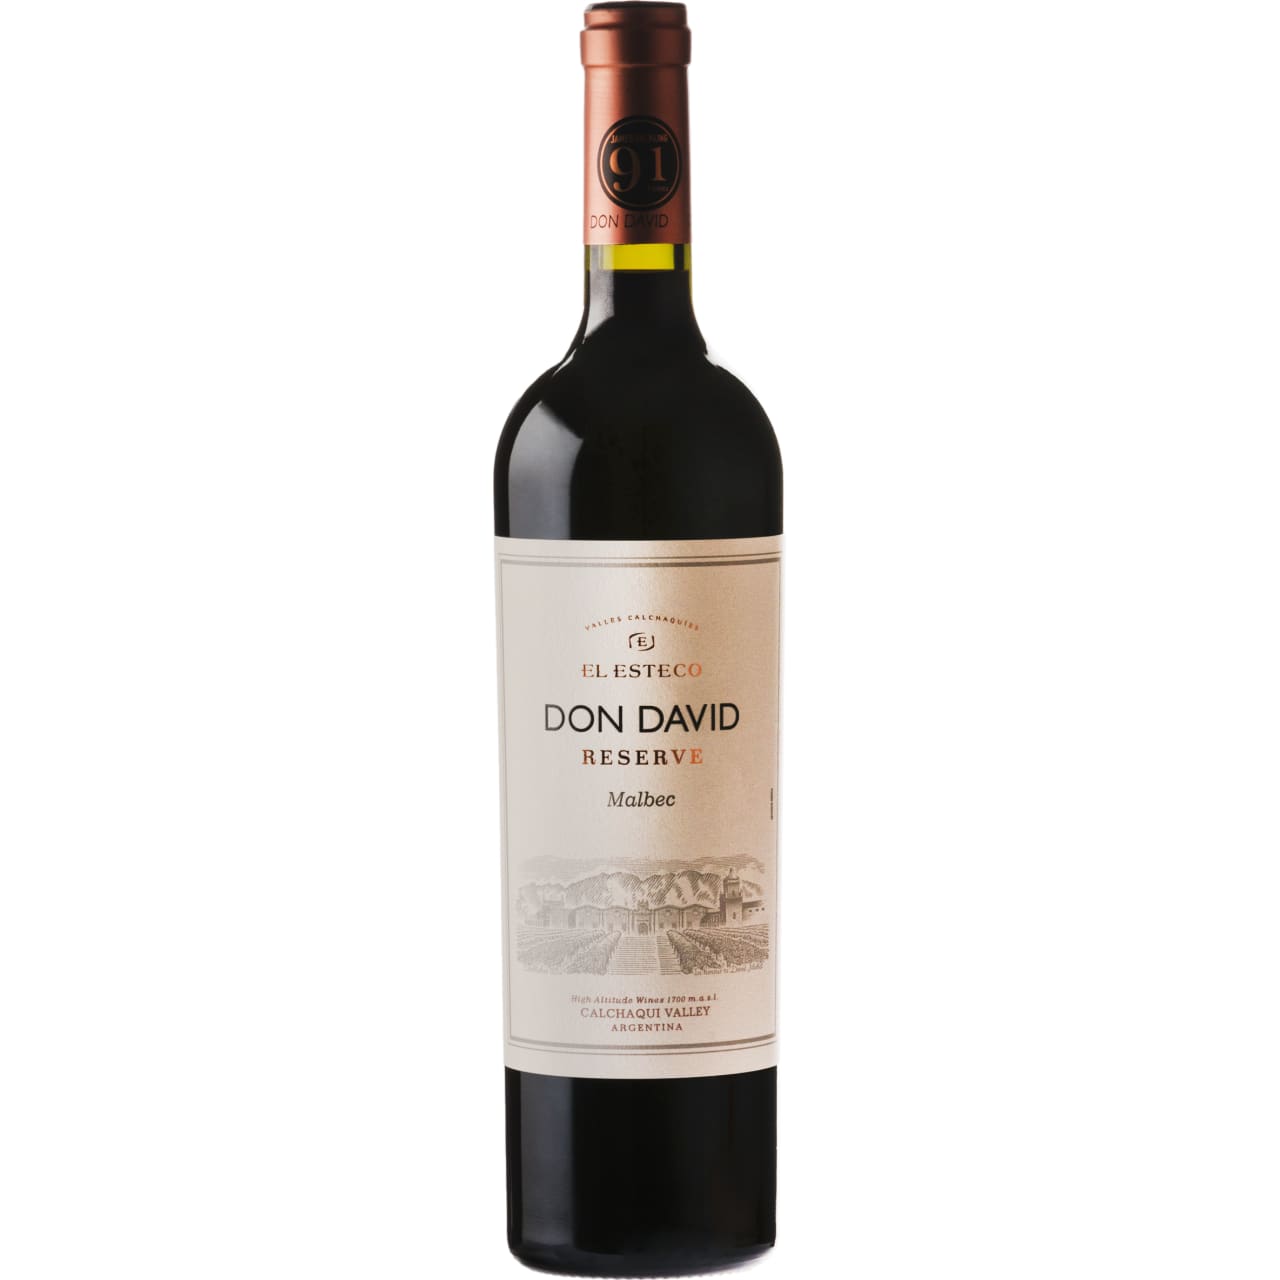 From the crazily high altitude (6,000+ feet) CalchaquÃ­ Valley in Salta, this was described by Decanter magazine as "a gem in the world of winemaking."